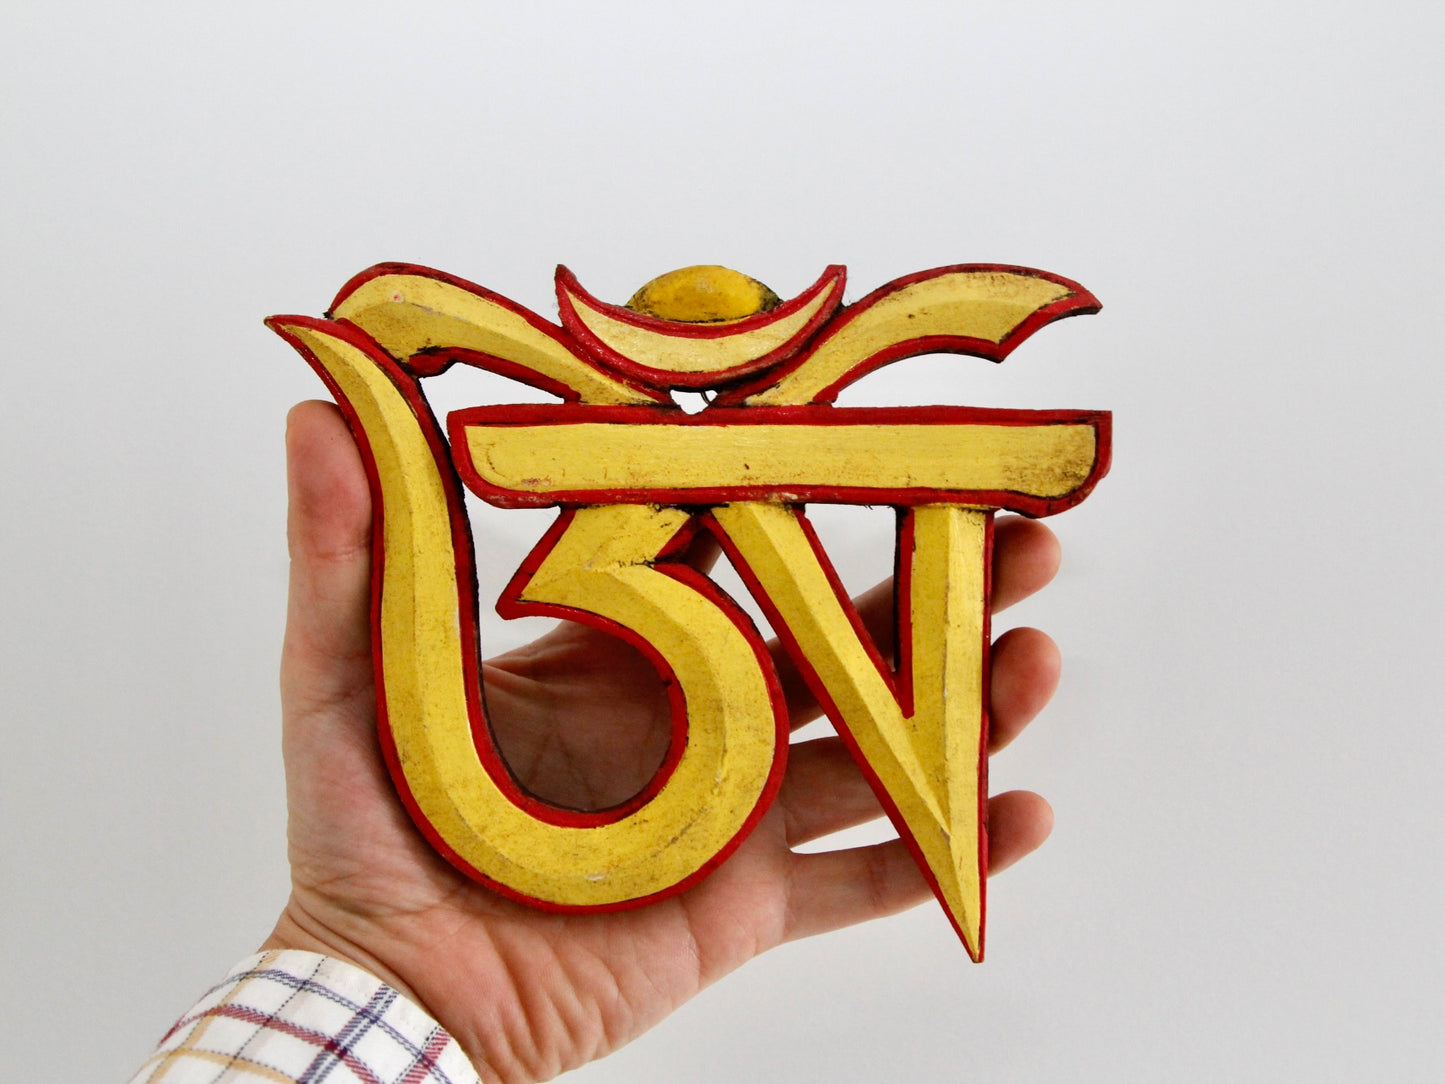 Tibetan Om wall hanging held in hand for size perspective